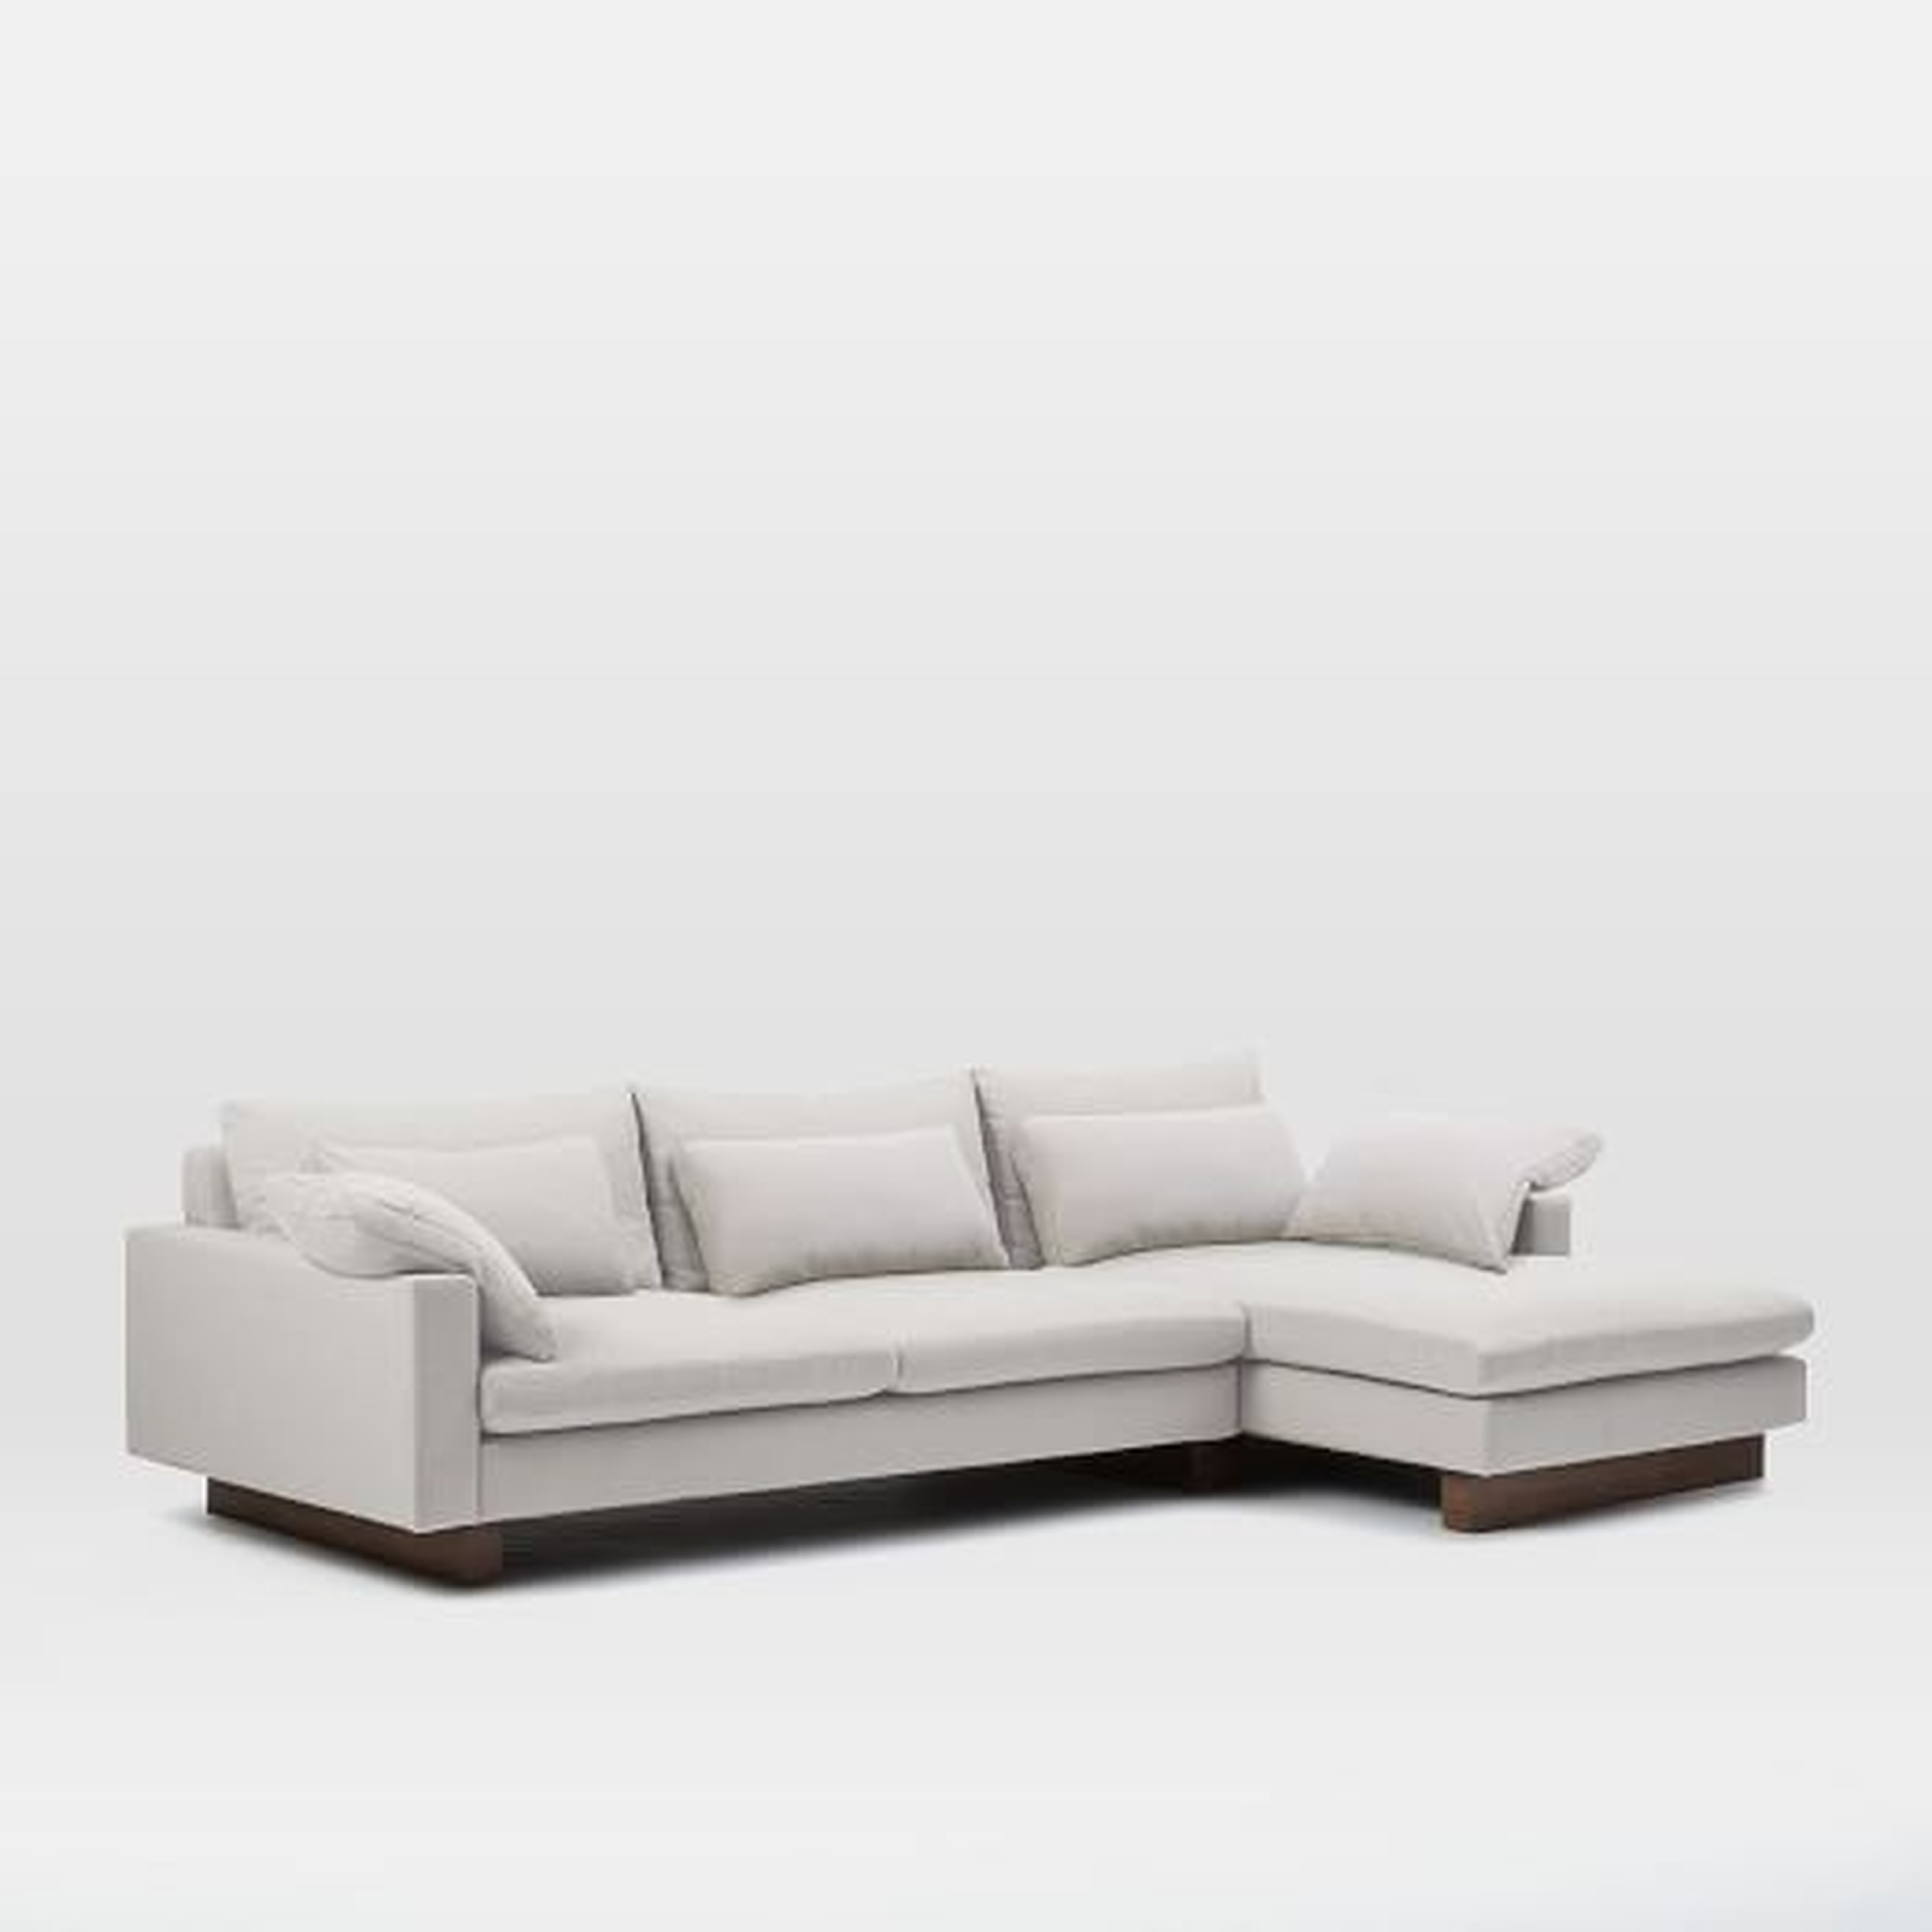 Harmony 2-Piece Chaise Sectional - RIGHT Chaise - West Elm